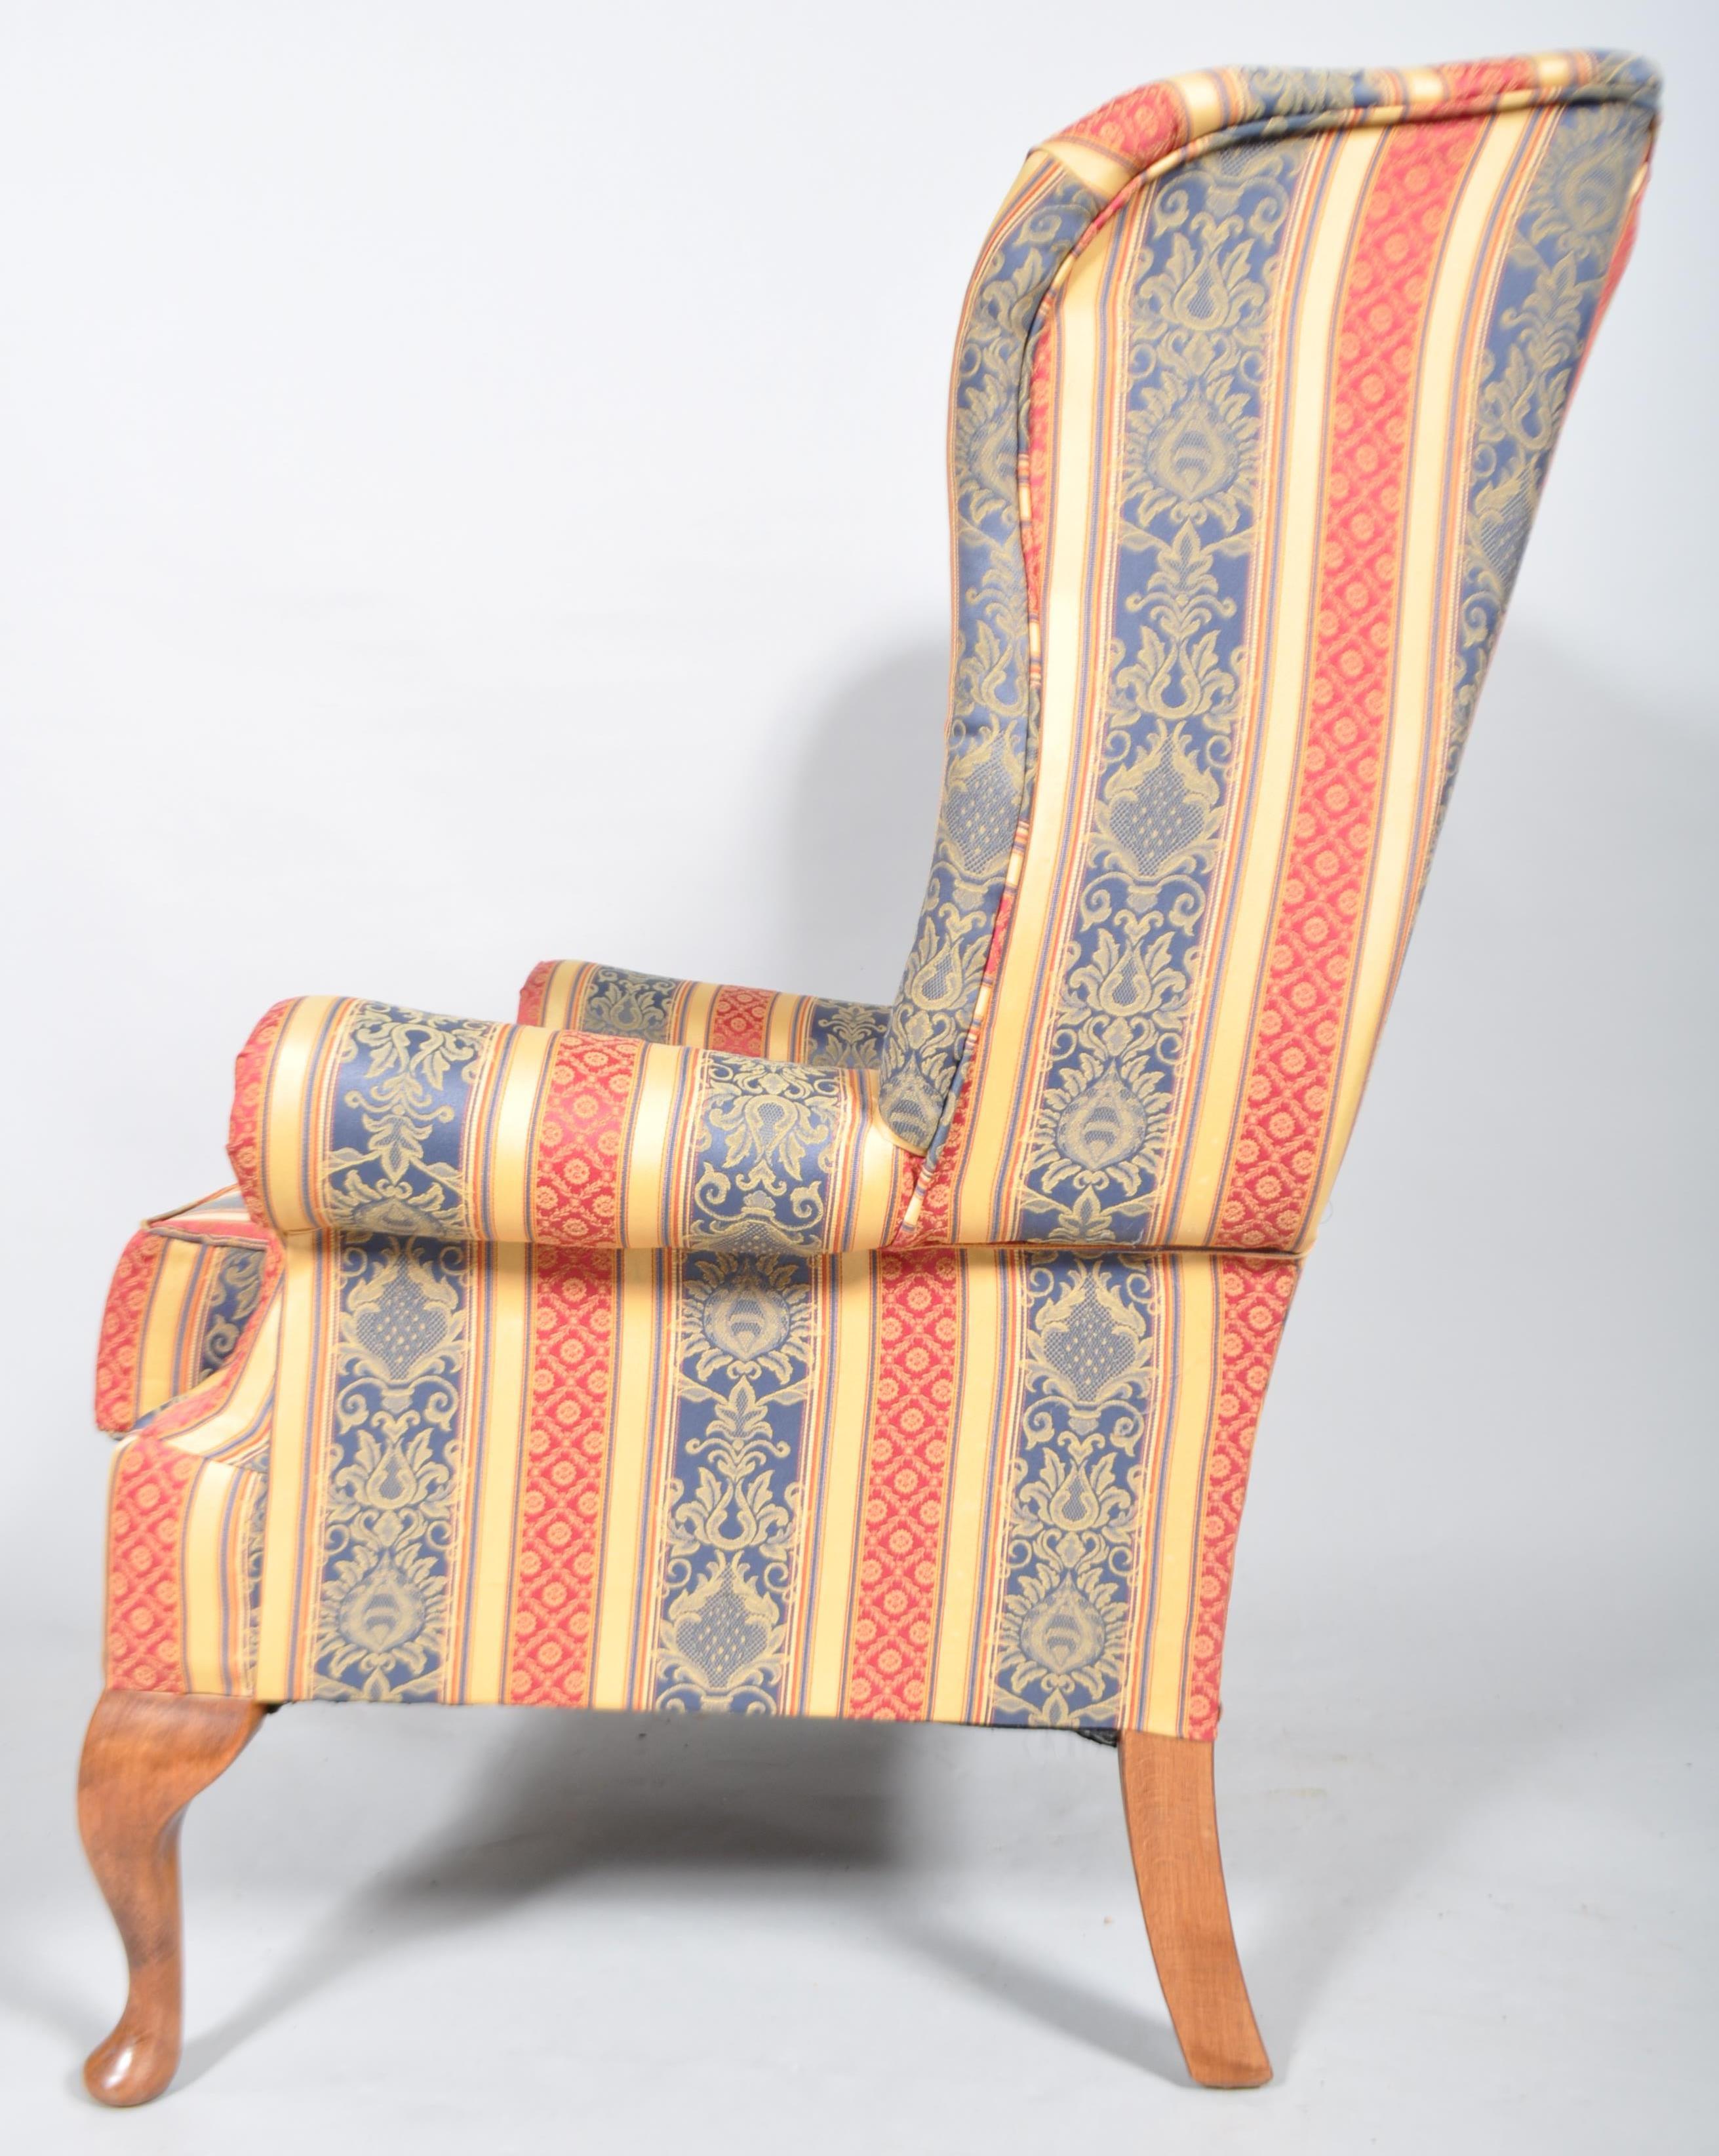 A 20th century Queen Anne style upholstered wing back armchair with barrel rolled arms, - Image 3 of 3